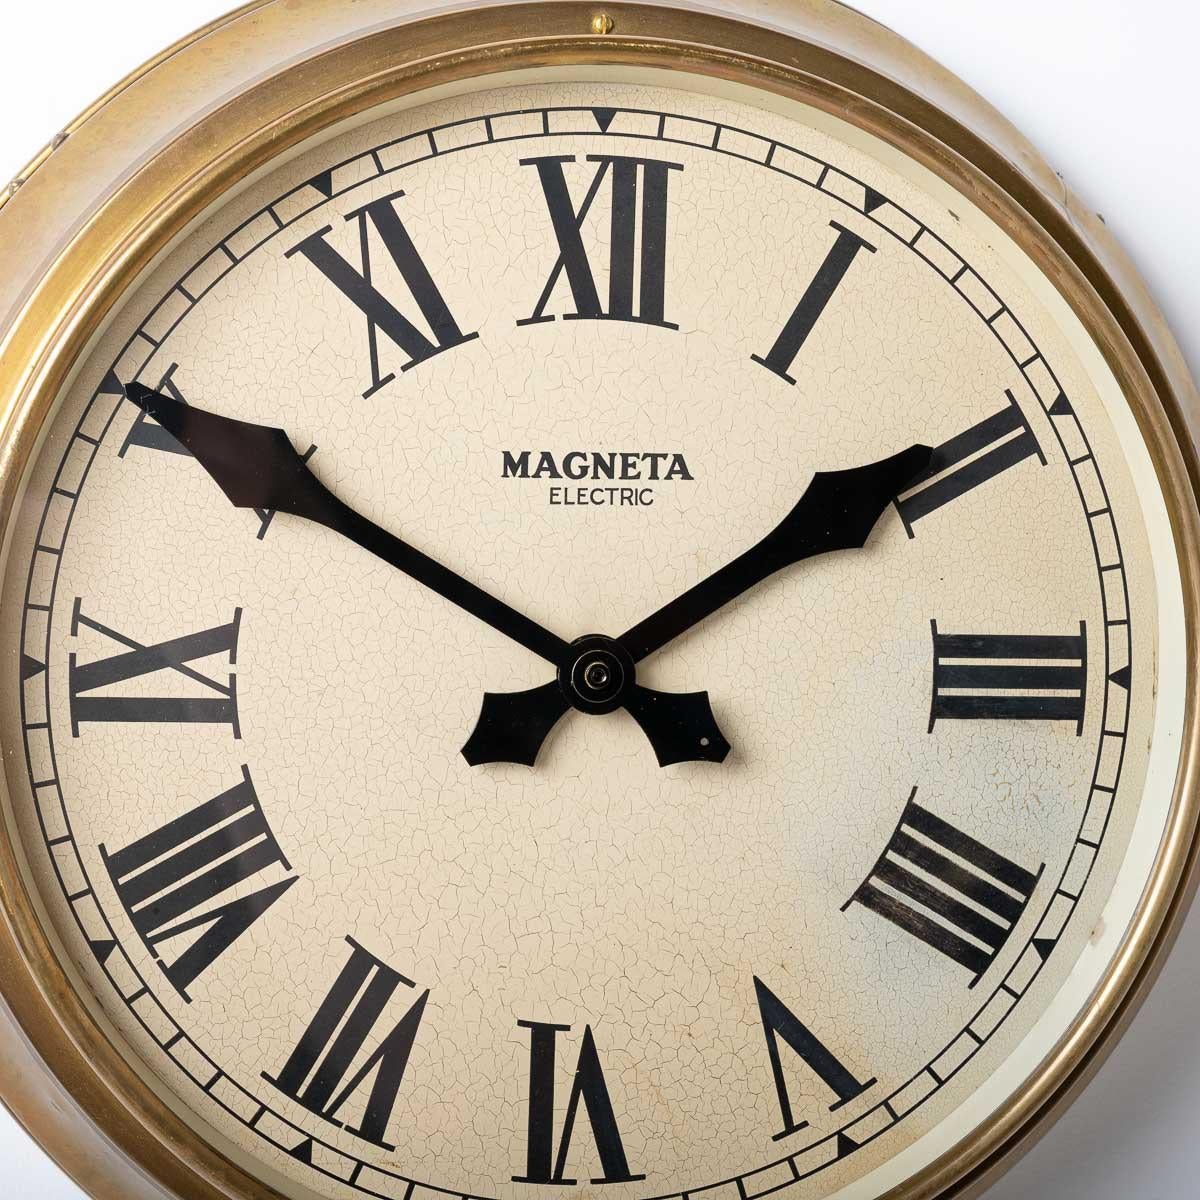 RECLAIMED BRASS BRITISH RAILWAY WALL CLOCK

A beautiful brass vintage clock by Magneta Time Co Ltd 

The brass case has been polished and unsealed ready to age naturally, the hands display the wonderful diamond shaped tips and tails unique to